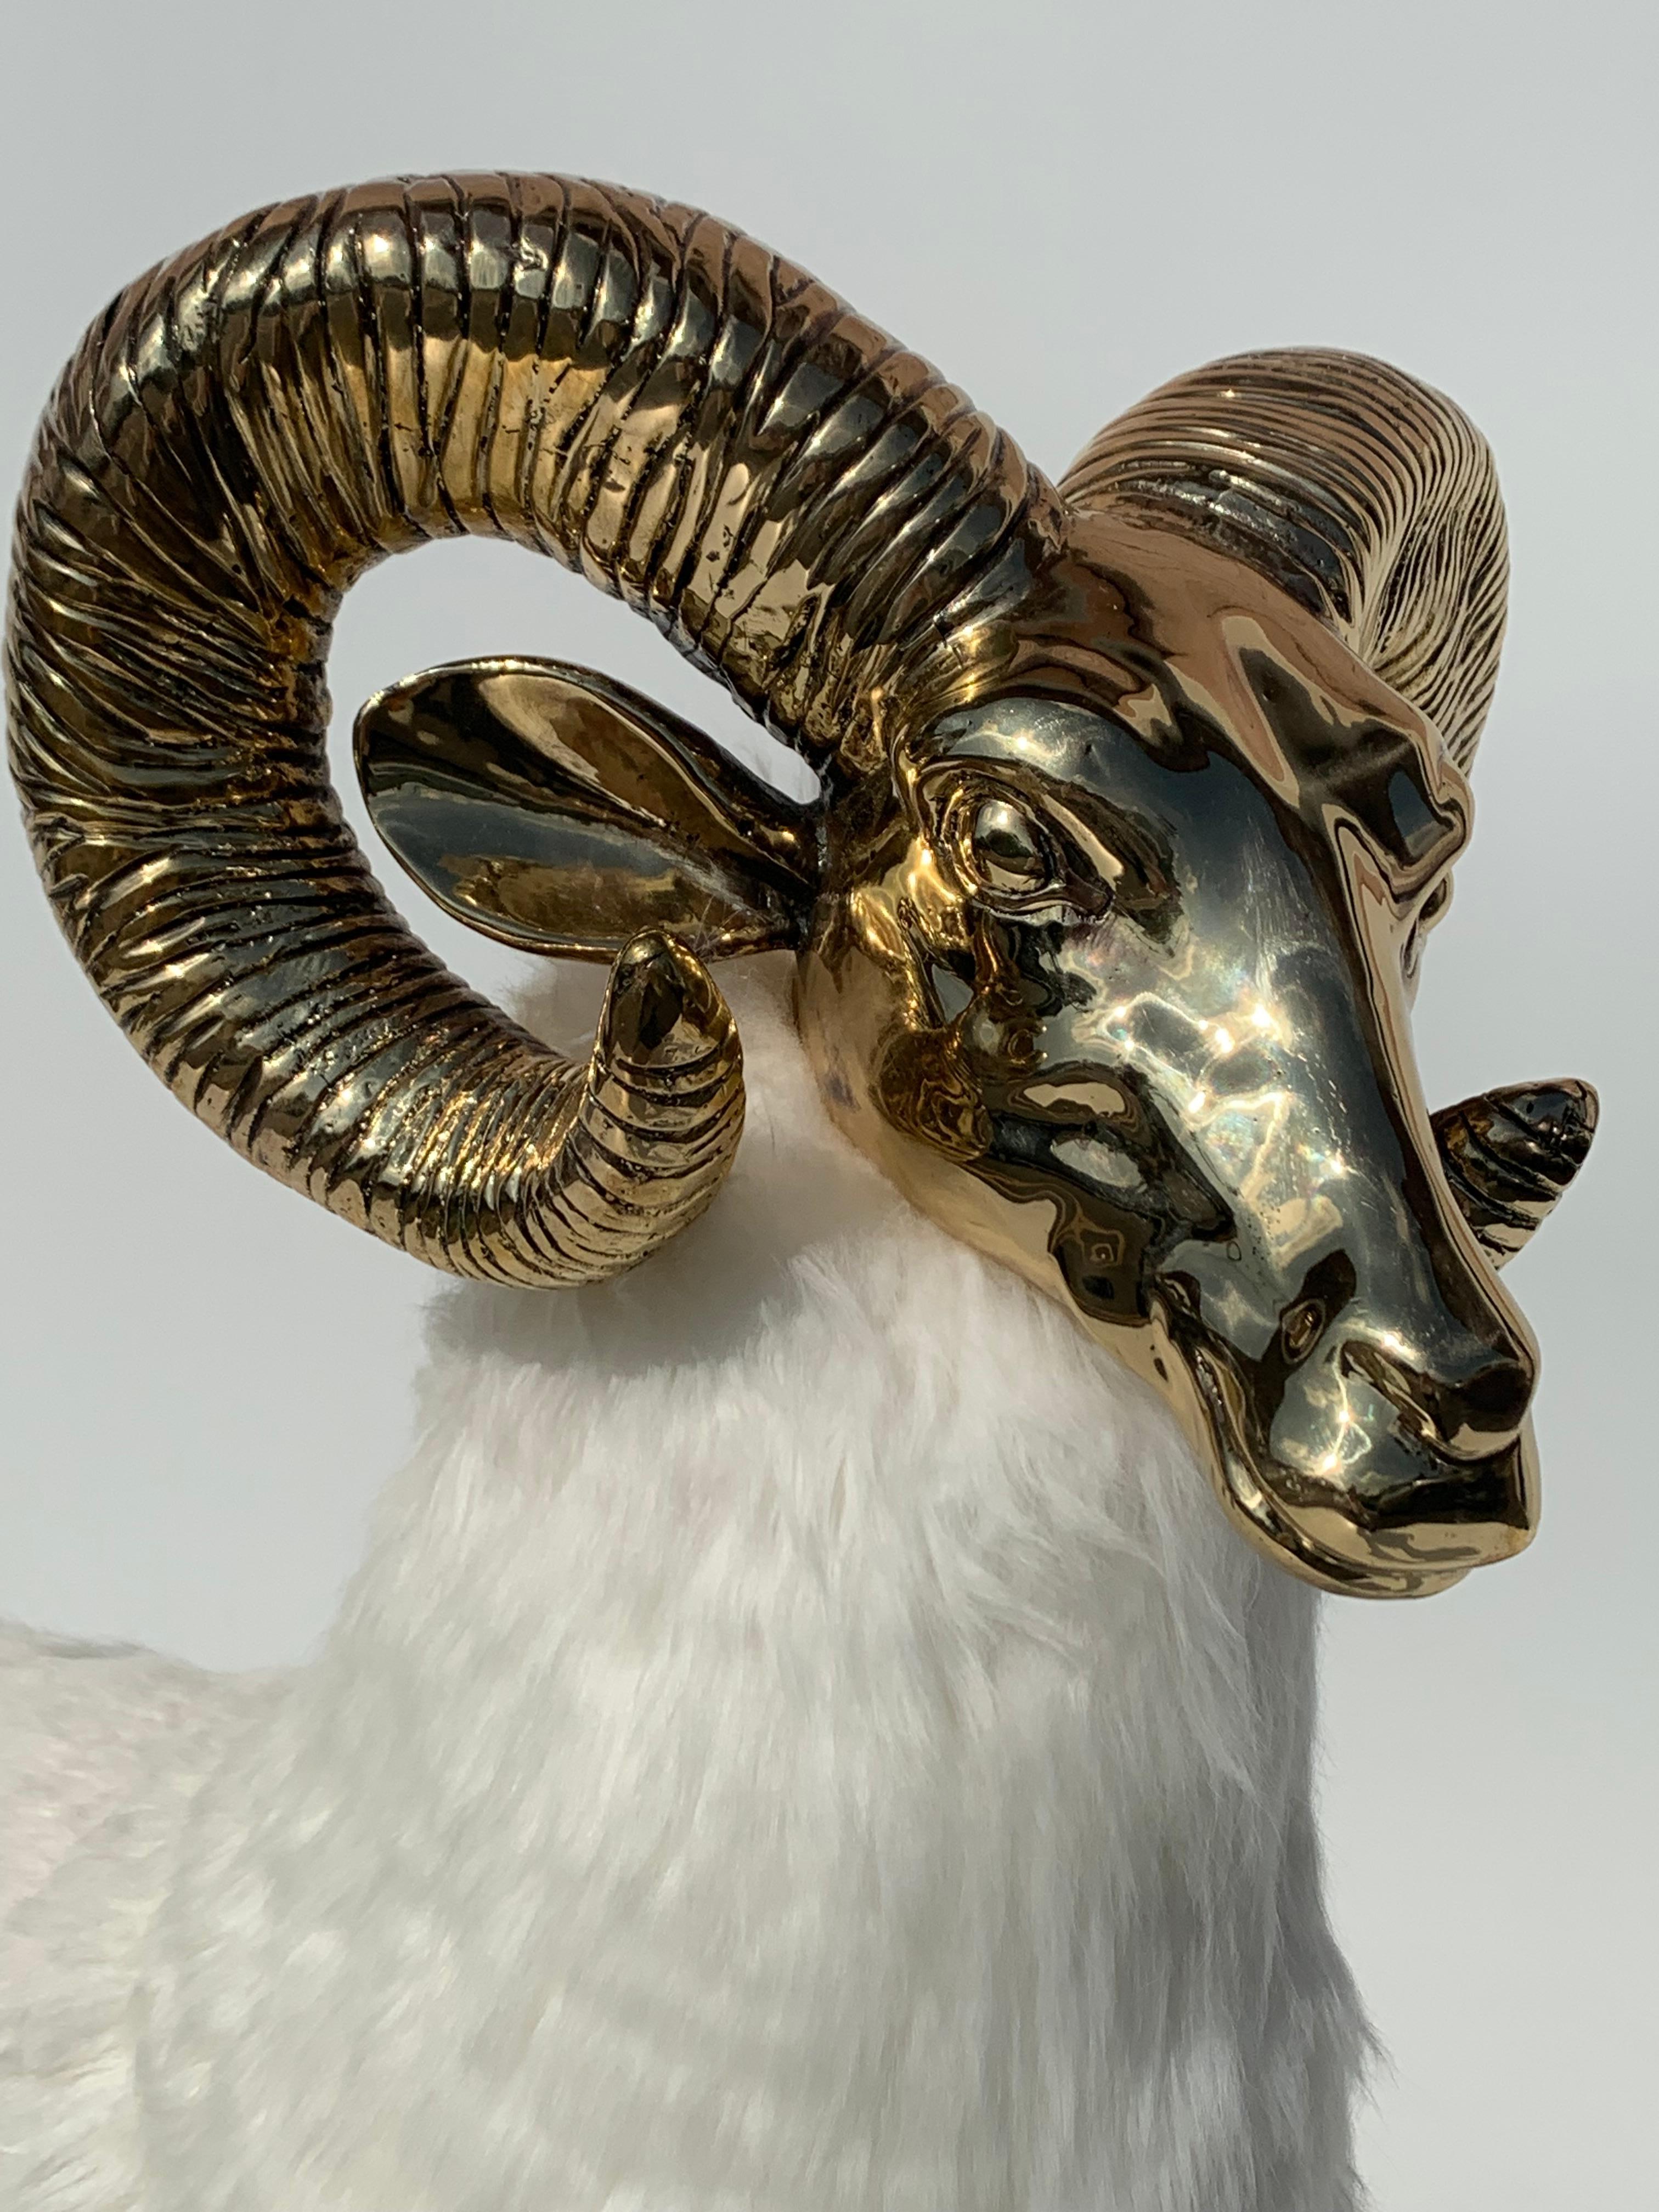 Polished Brass Ram or Sheep Sculpture 4